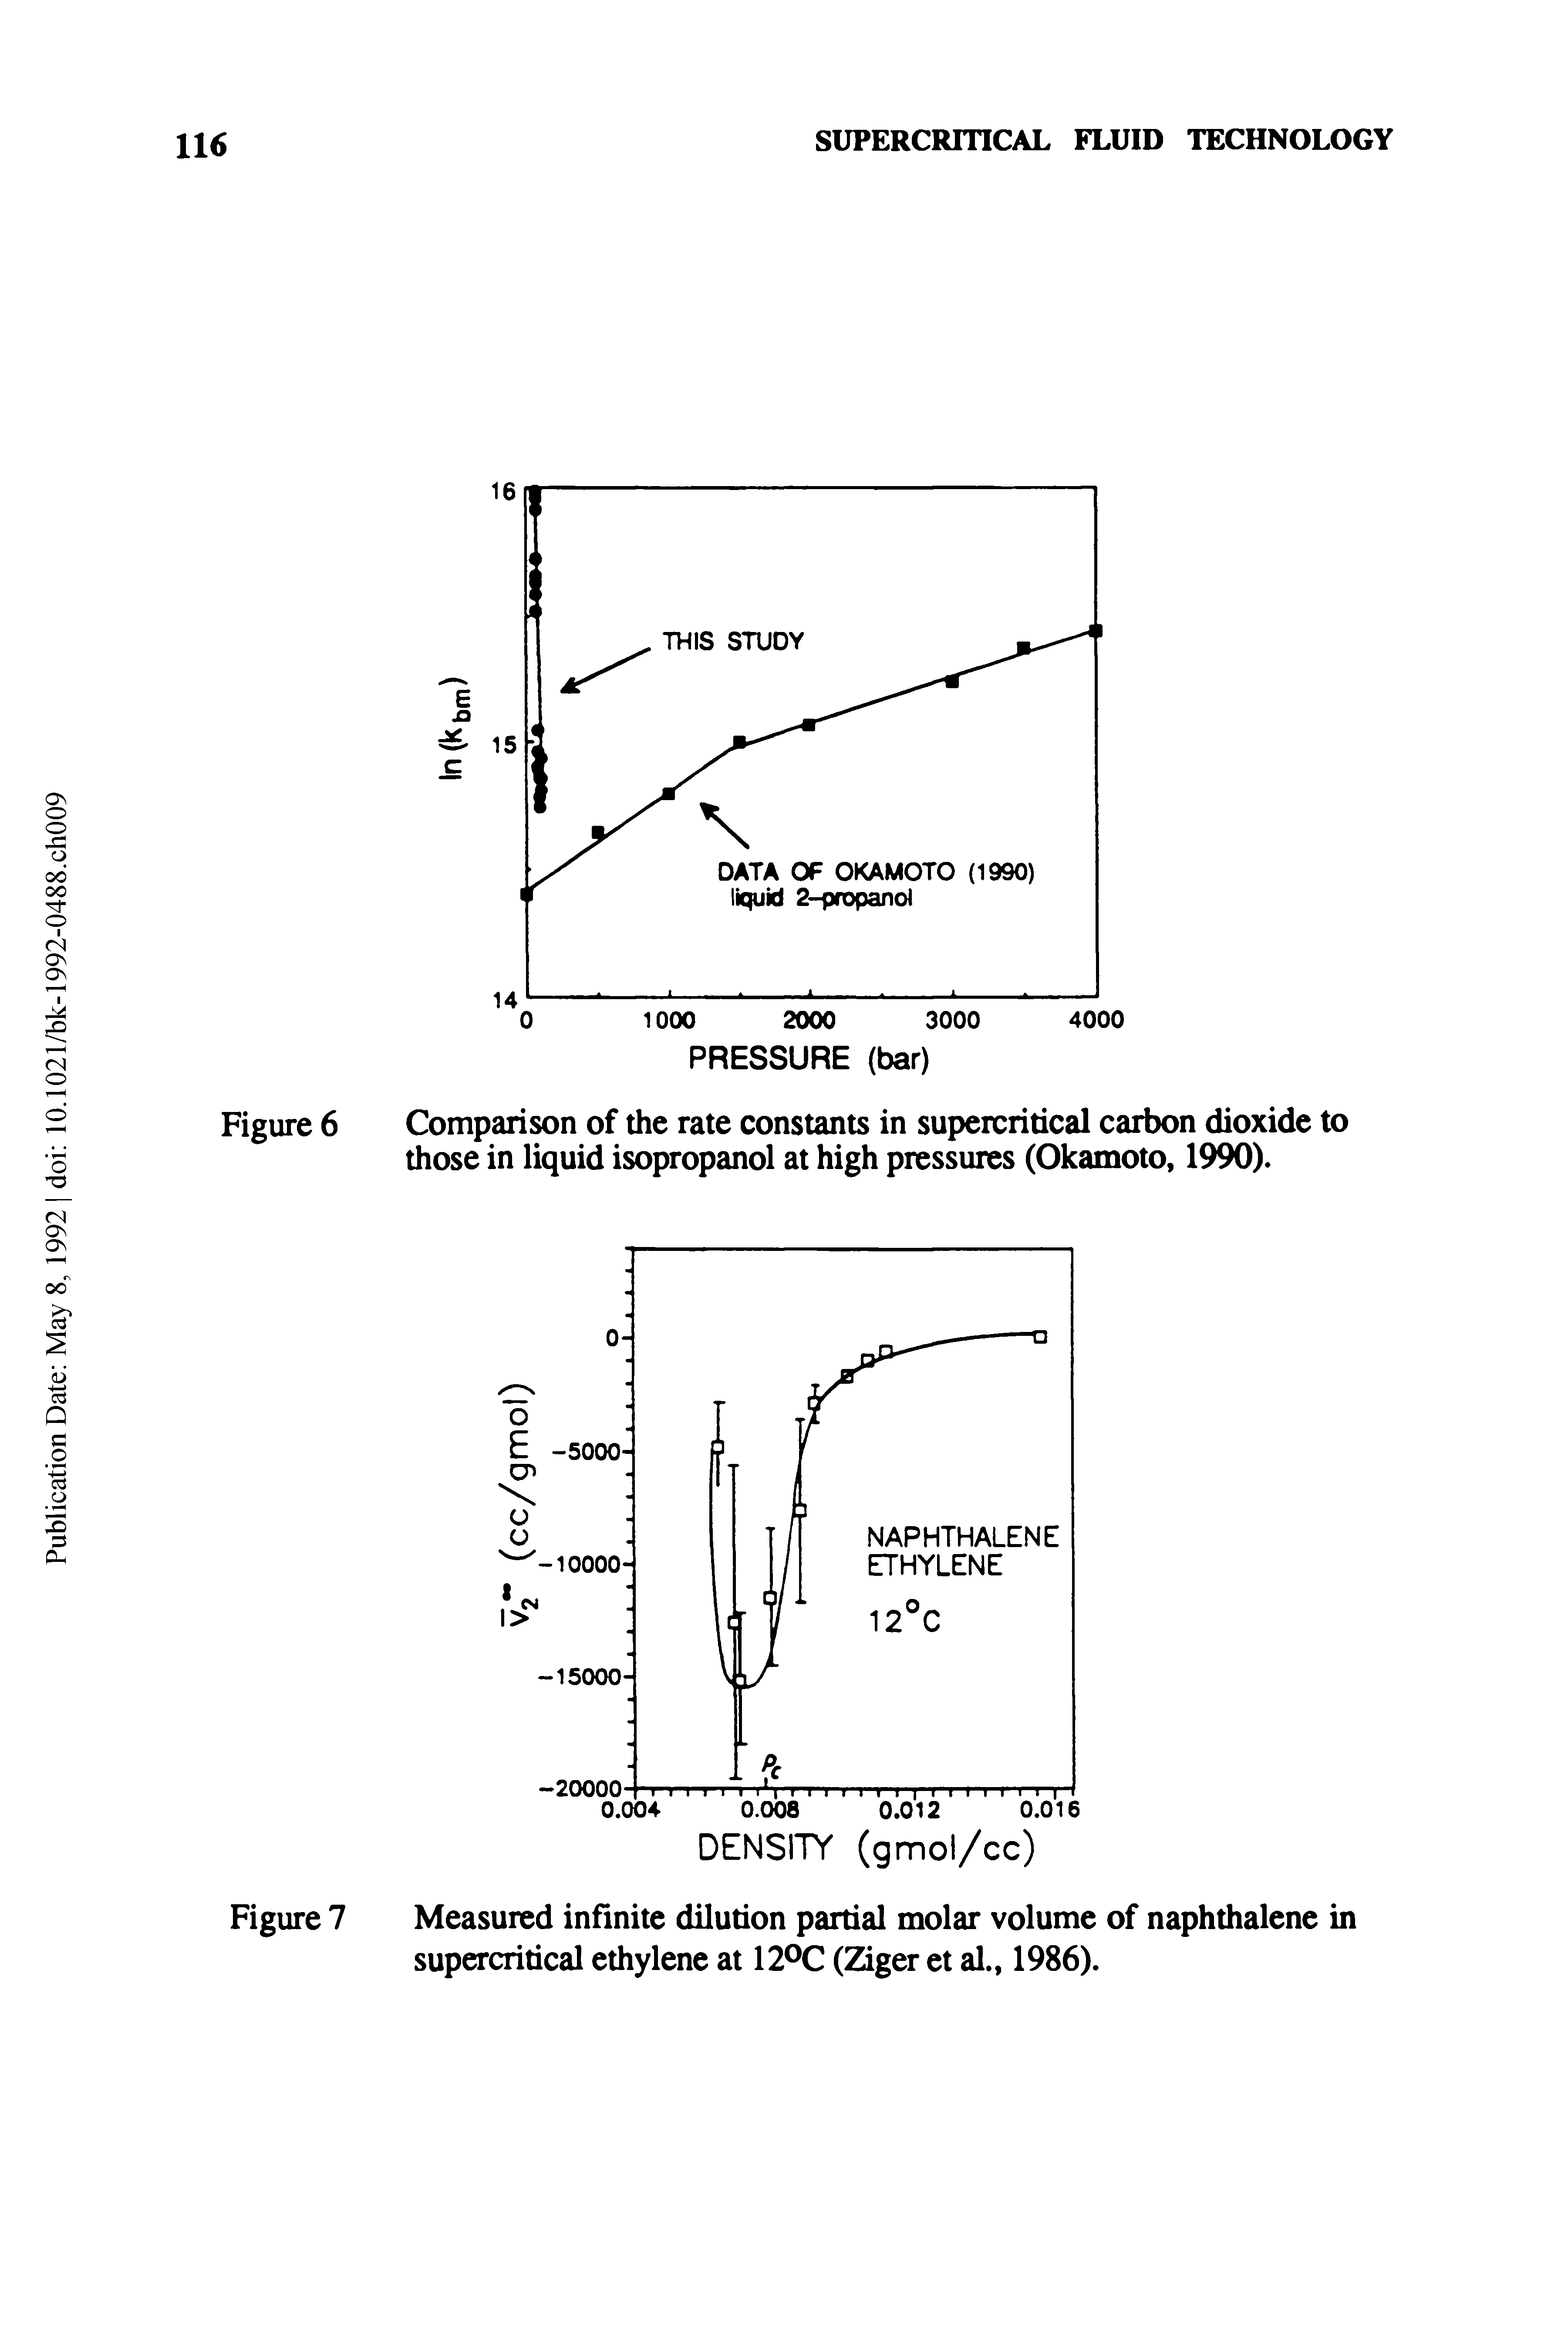 Figure 6 Comparison of the rate constants in supercritical carbon dioxide to those in liquid isopropanol at high pressures (Okamoto, 1990).